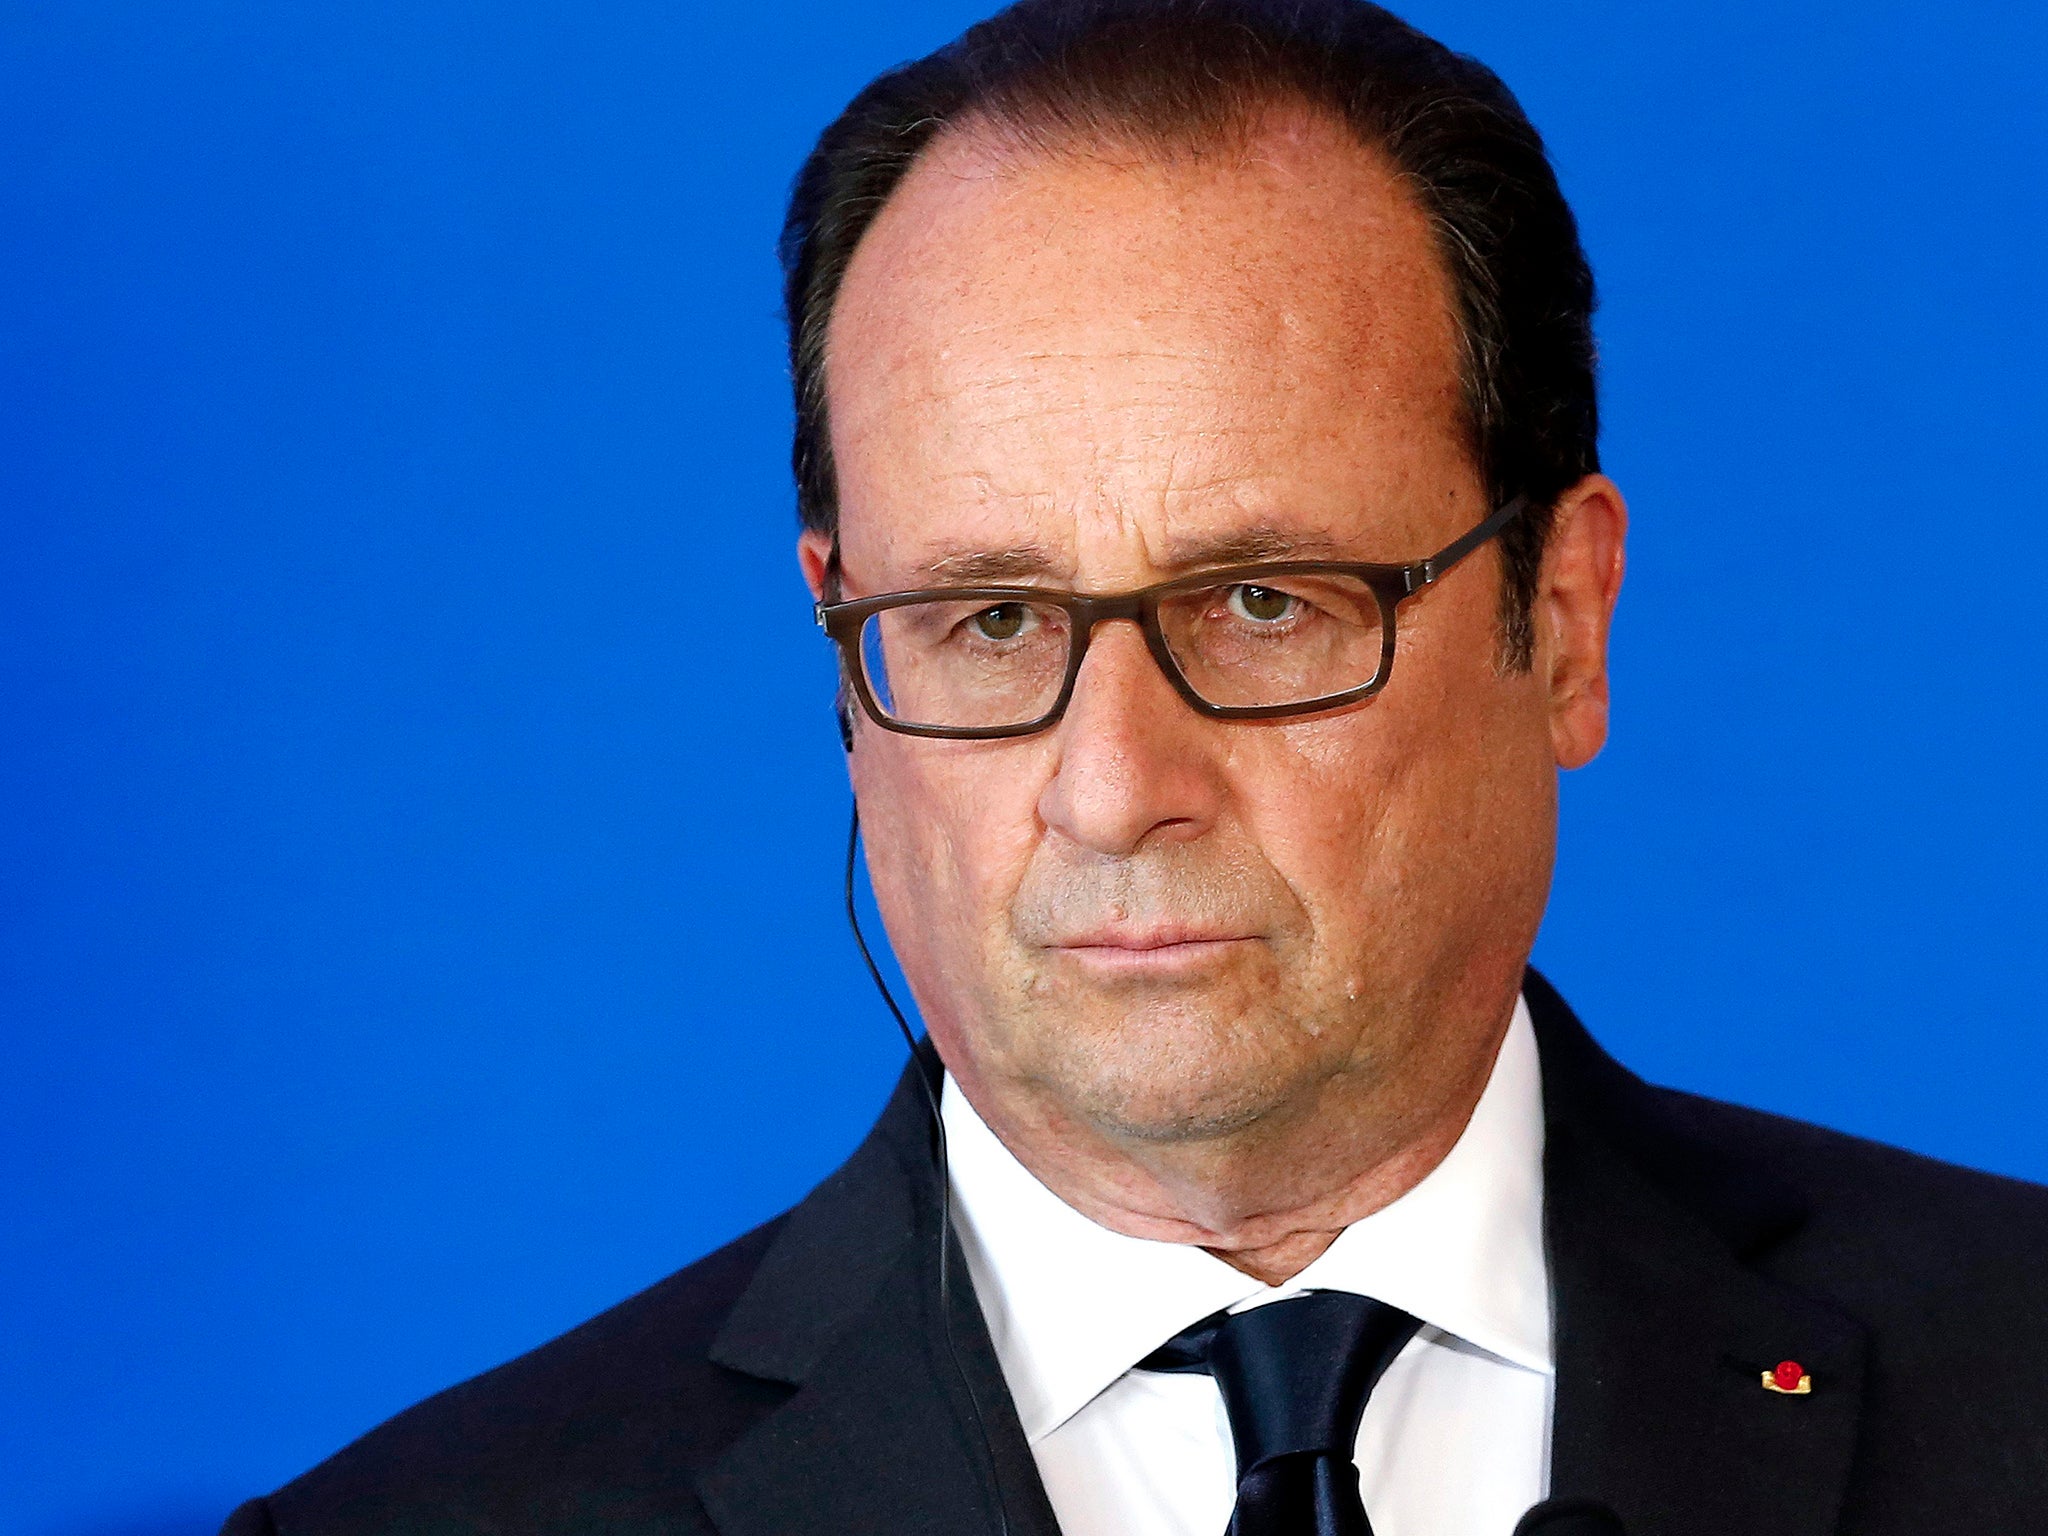 Francois Hollande has become the first French president in modern history to not seek re-election